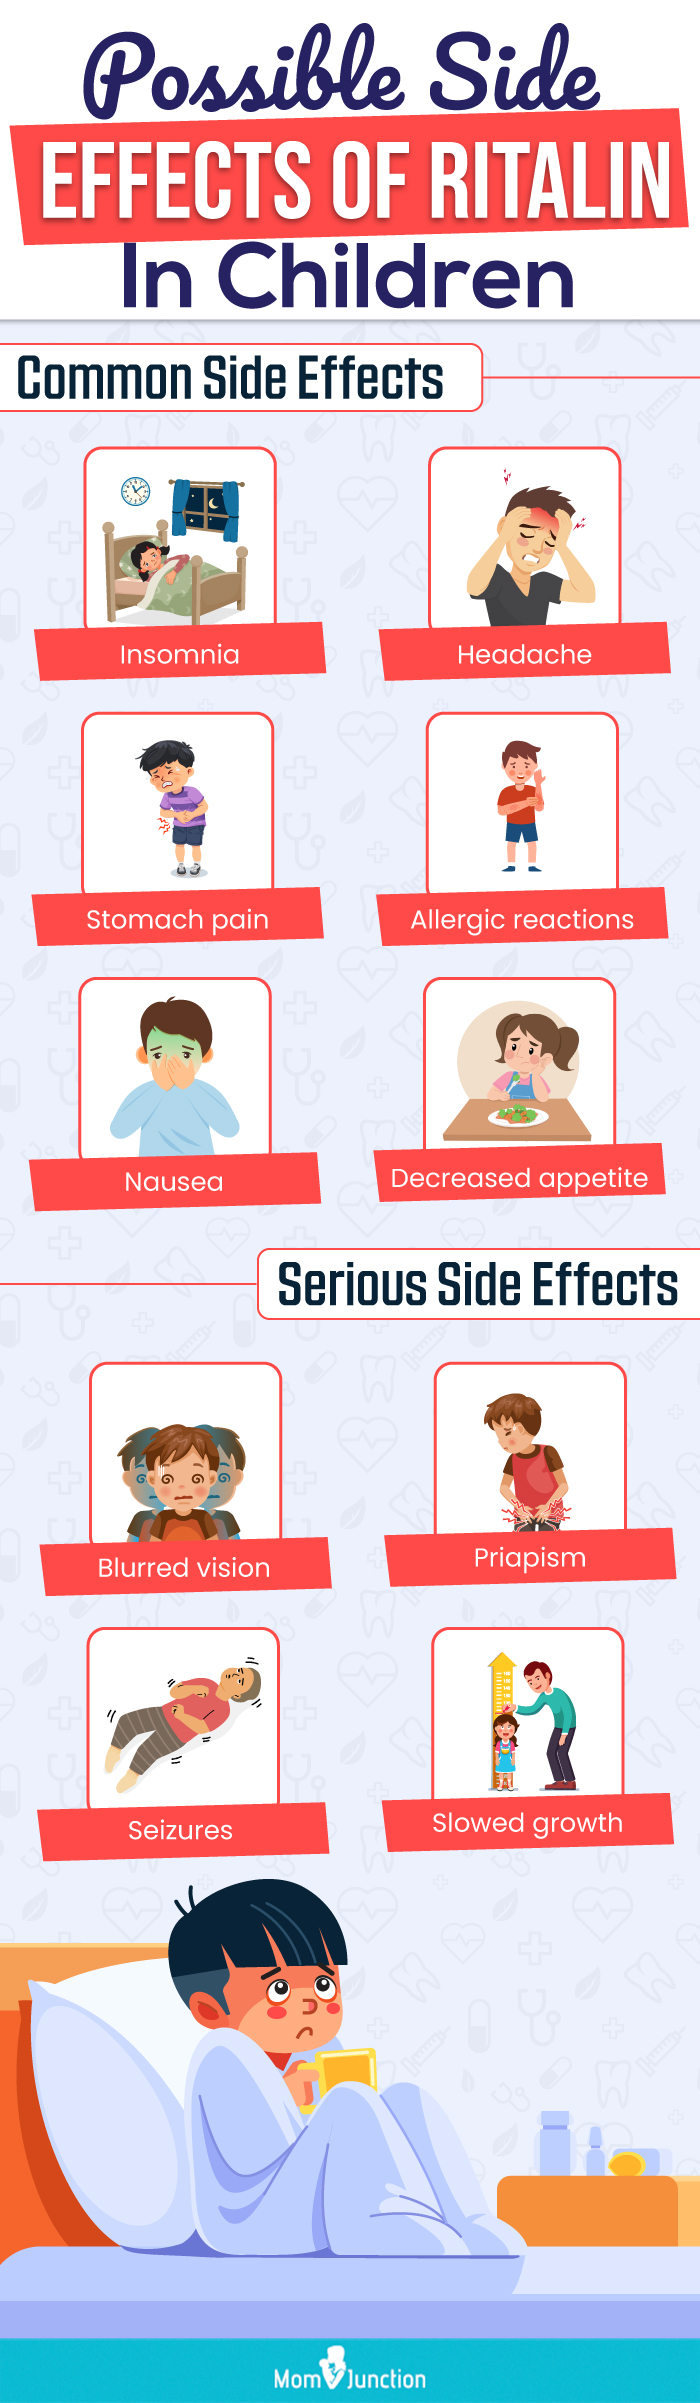 possible side effects of ritalin in children (infographic)